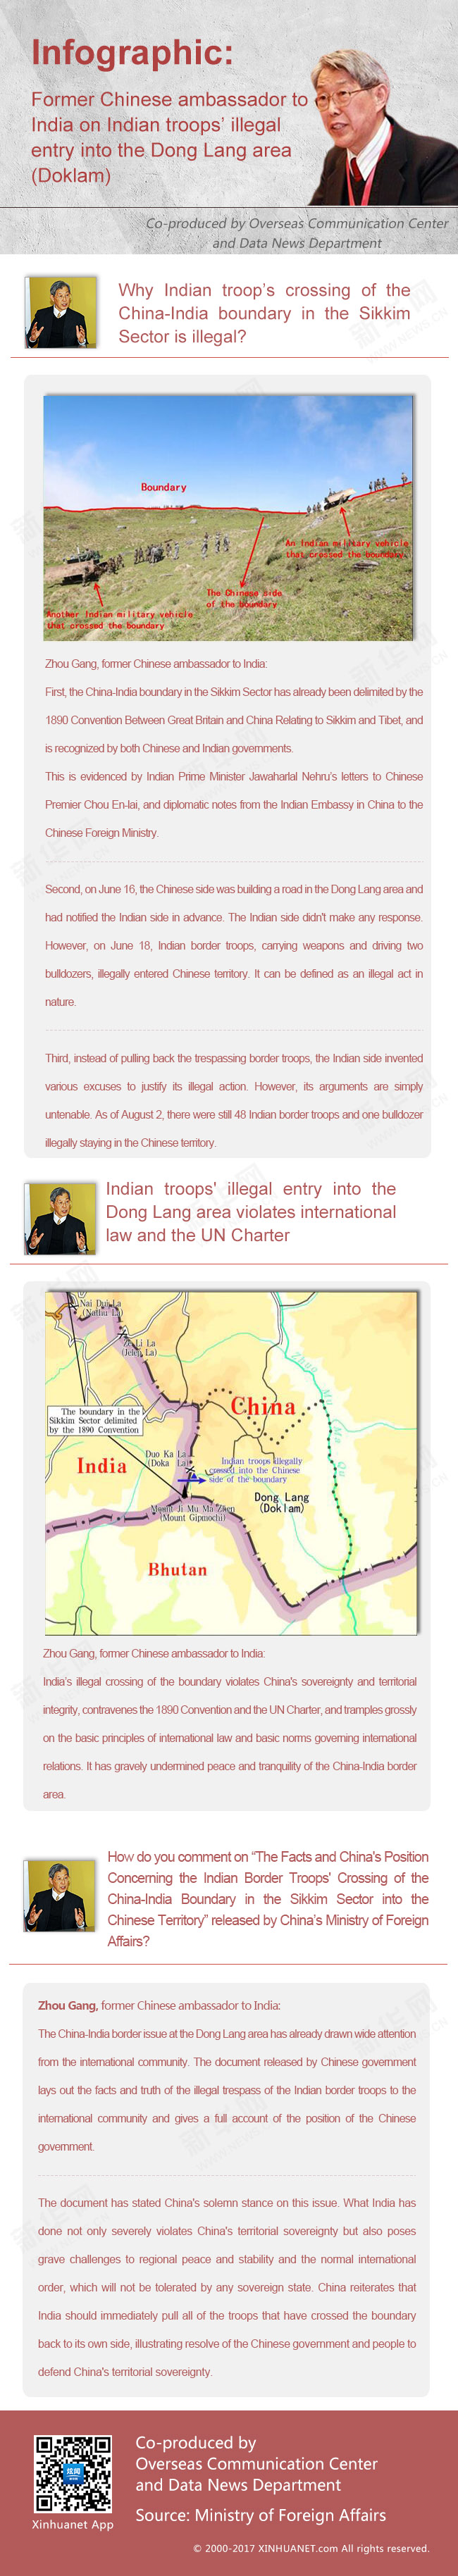 Infographic: Former diplomat on India's trespassing of China-India boundary